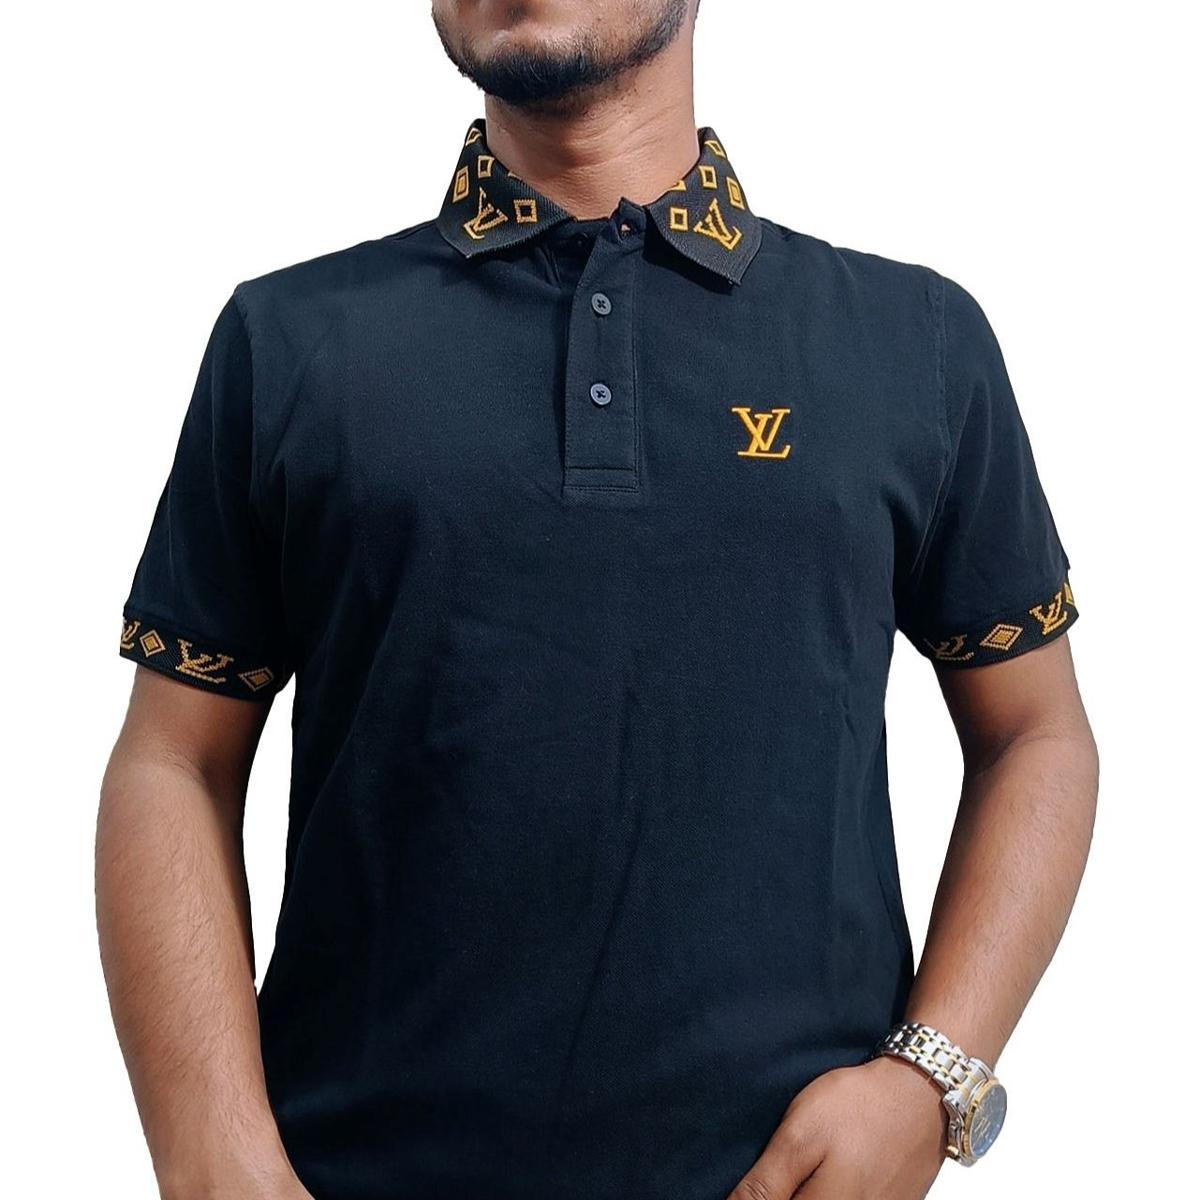 Louis Vuitton Lv Check Pattern On Sleeves And Collar Black Embroidered Polo  Shirts - Blinkenzo